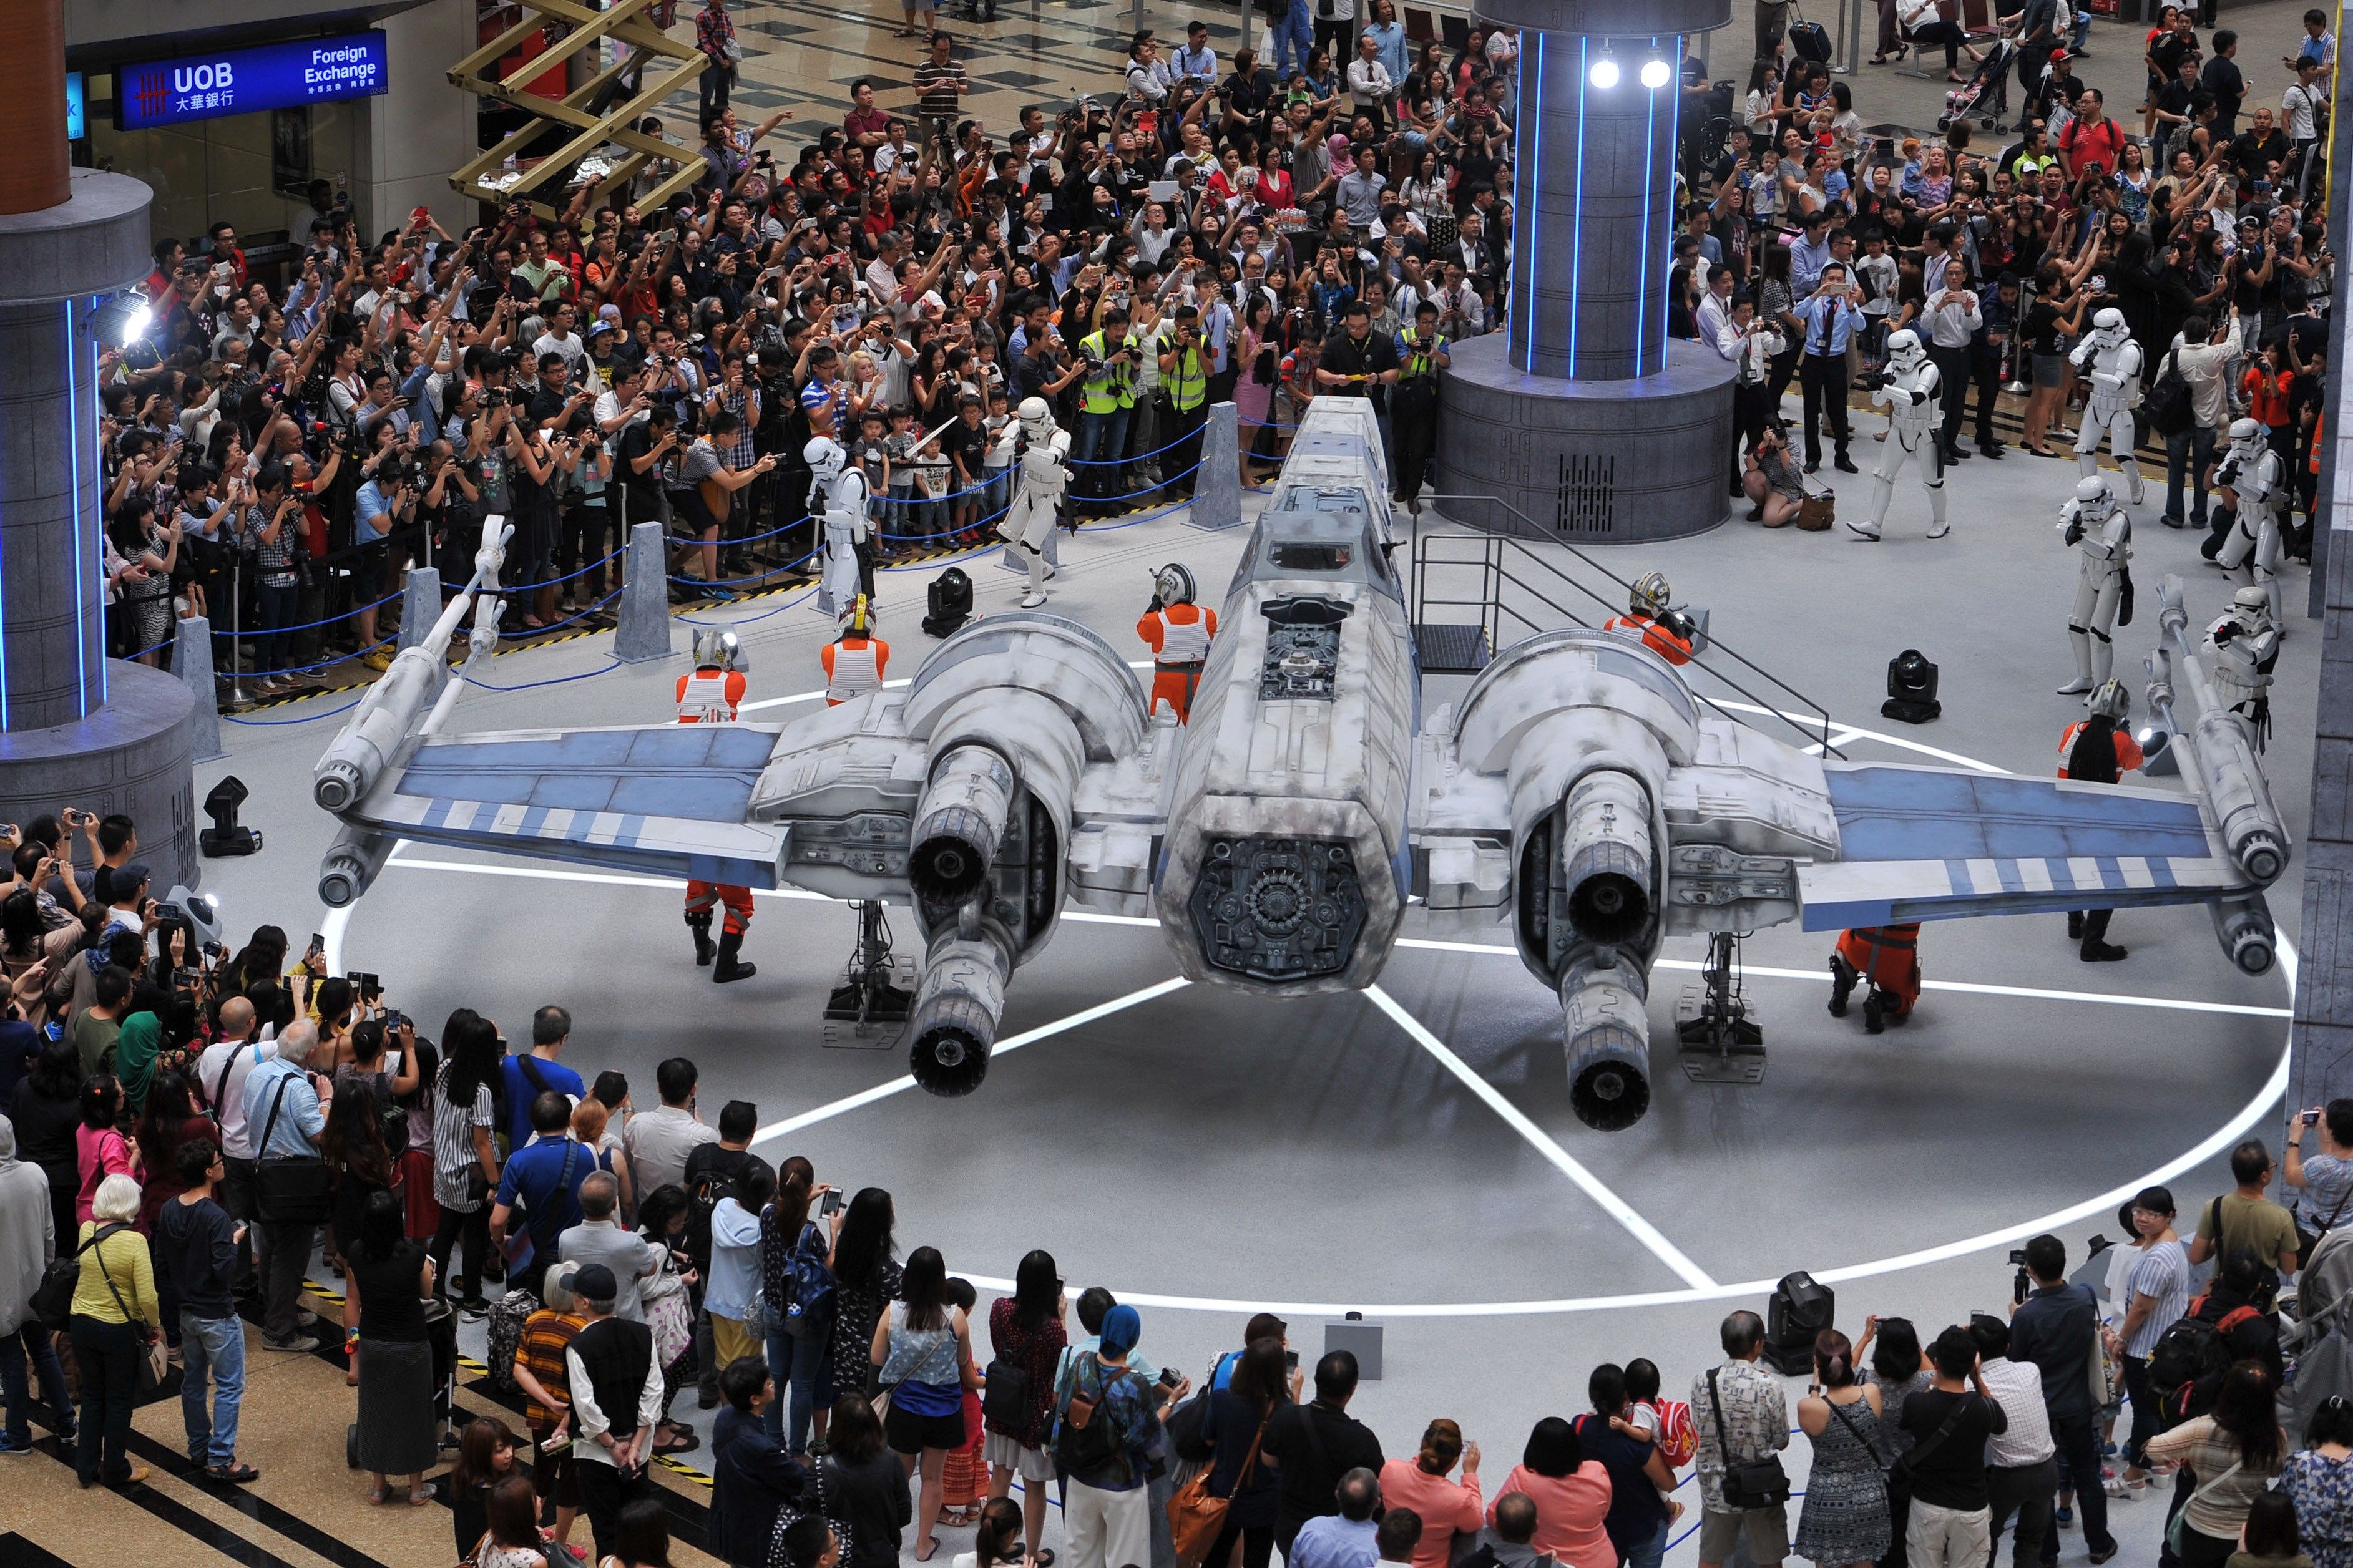 medarbejder personificering Inhibere Life-size" Star Wars X-Wing spotted at Singapore airport